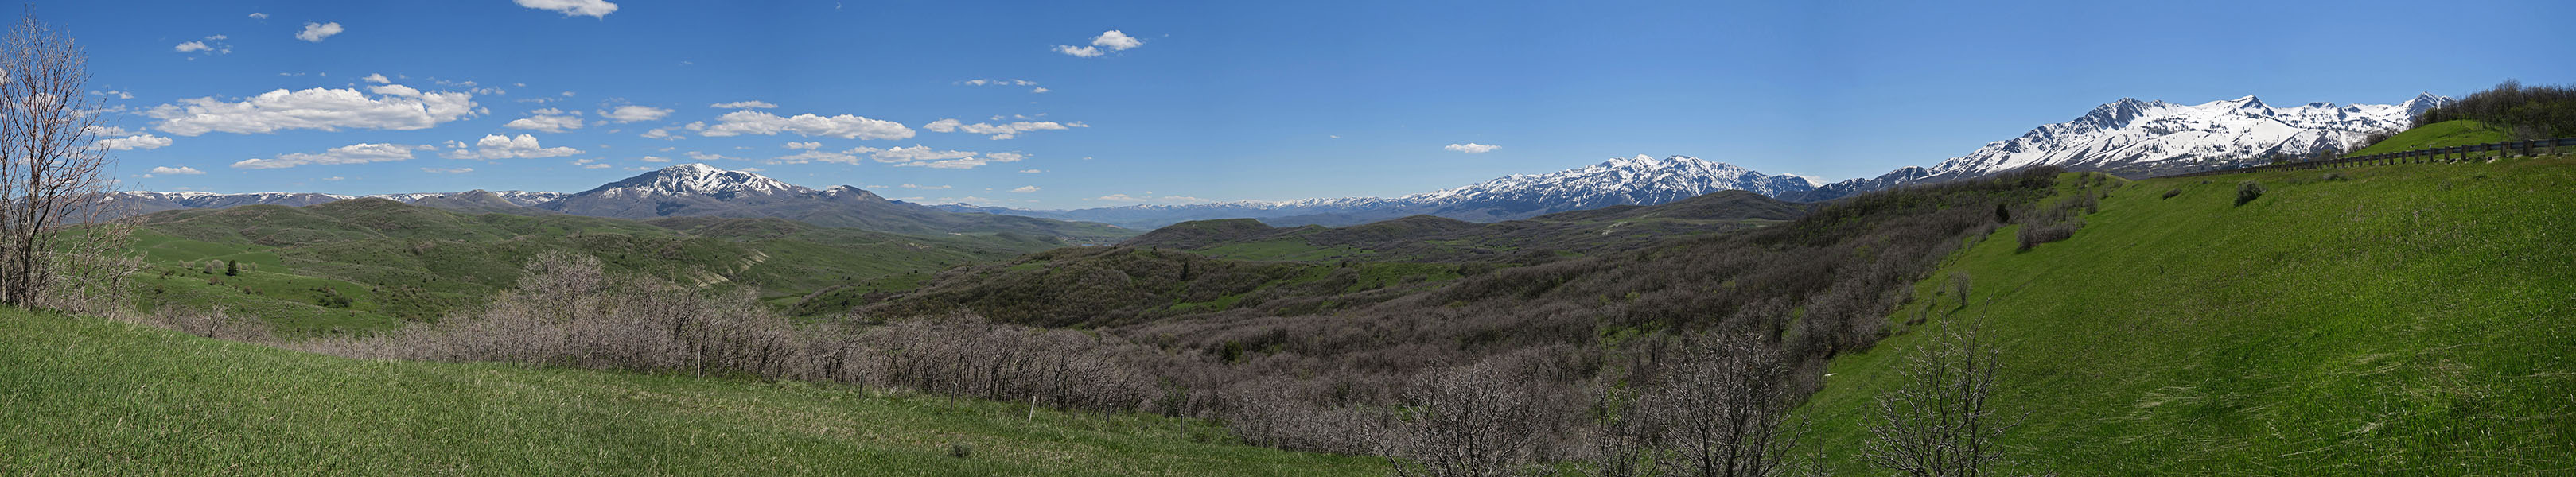 Wasatch Mountains panorama [SR-167, Uinta-Wasatch-Cache National Forest, Morgan County, Utah]